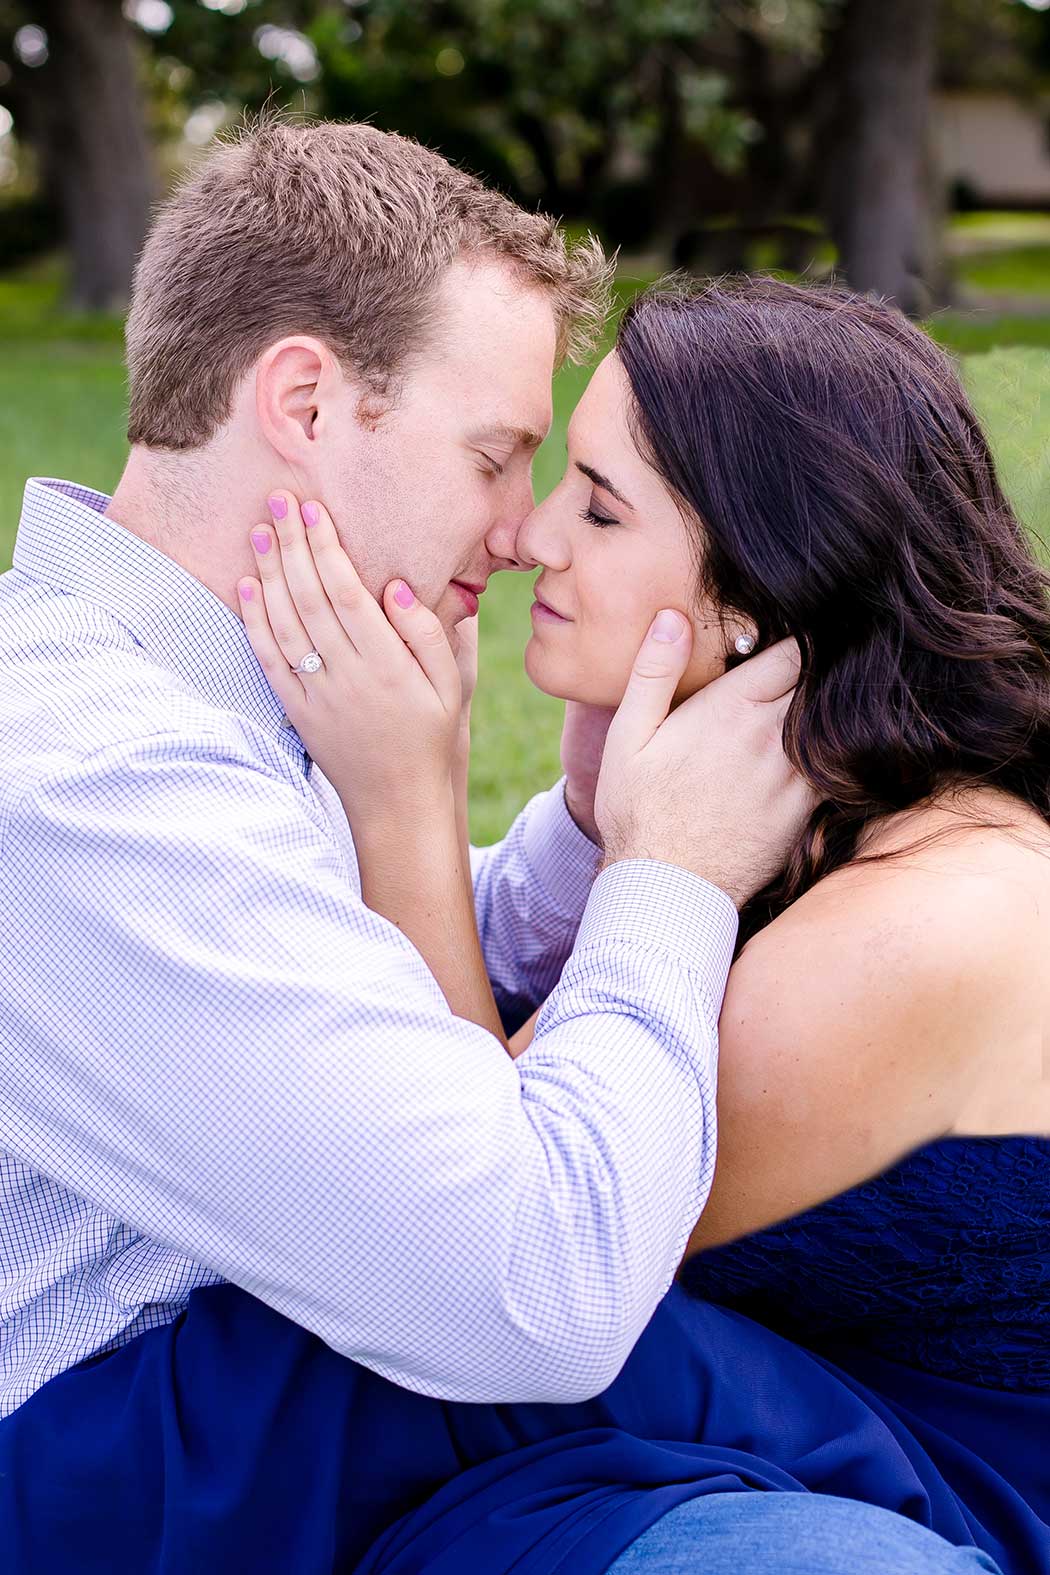 cute engagement photoshoot at robbins preserve park | romantic couples' photoshoot with formal dress